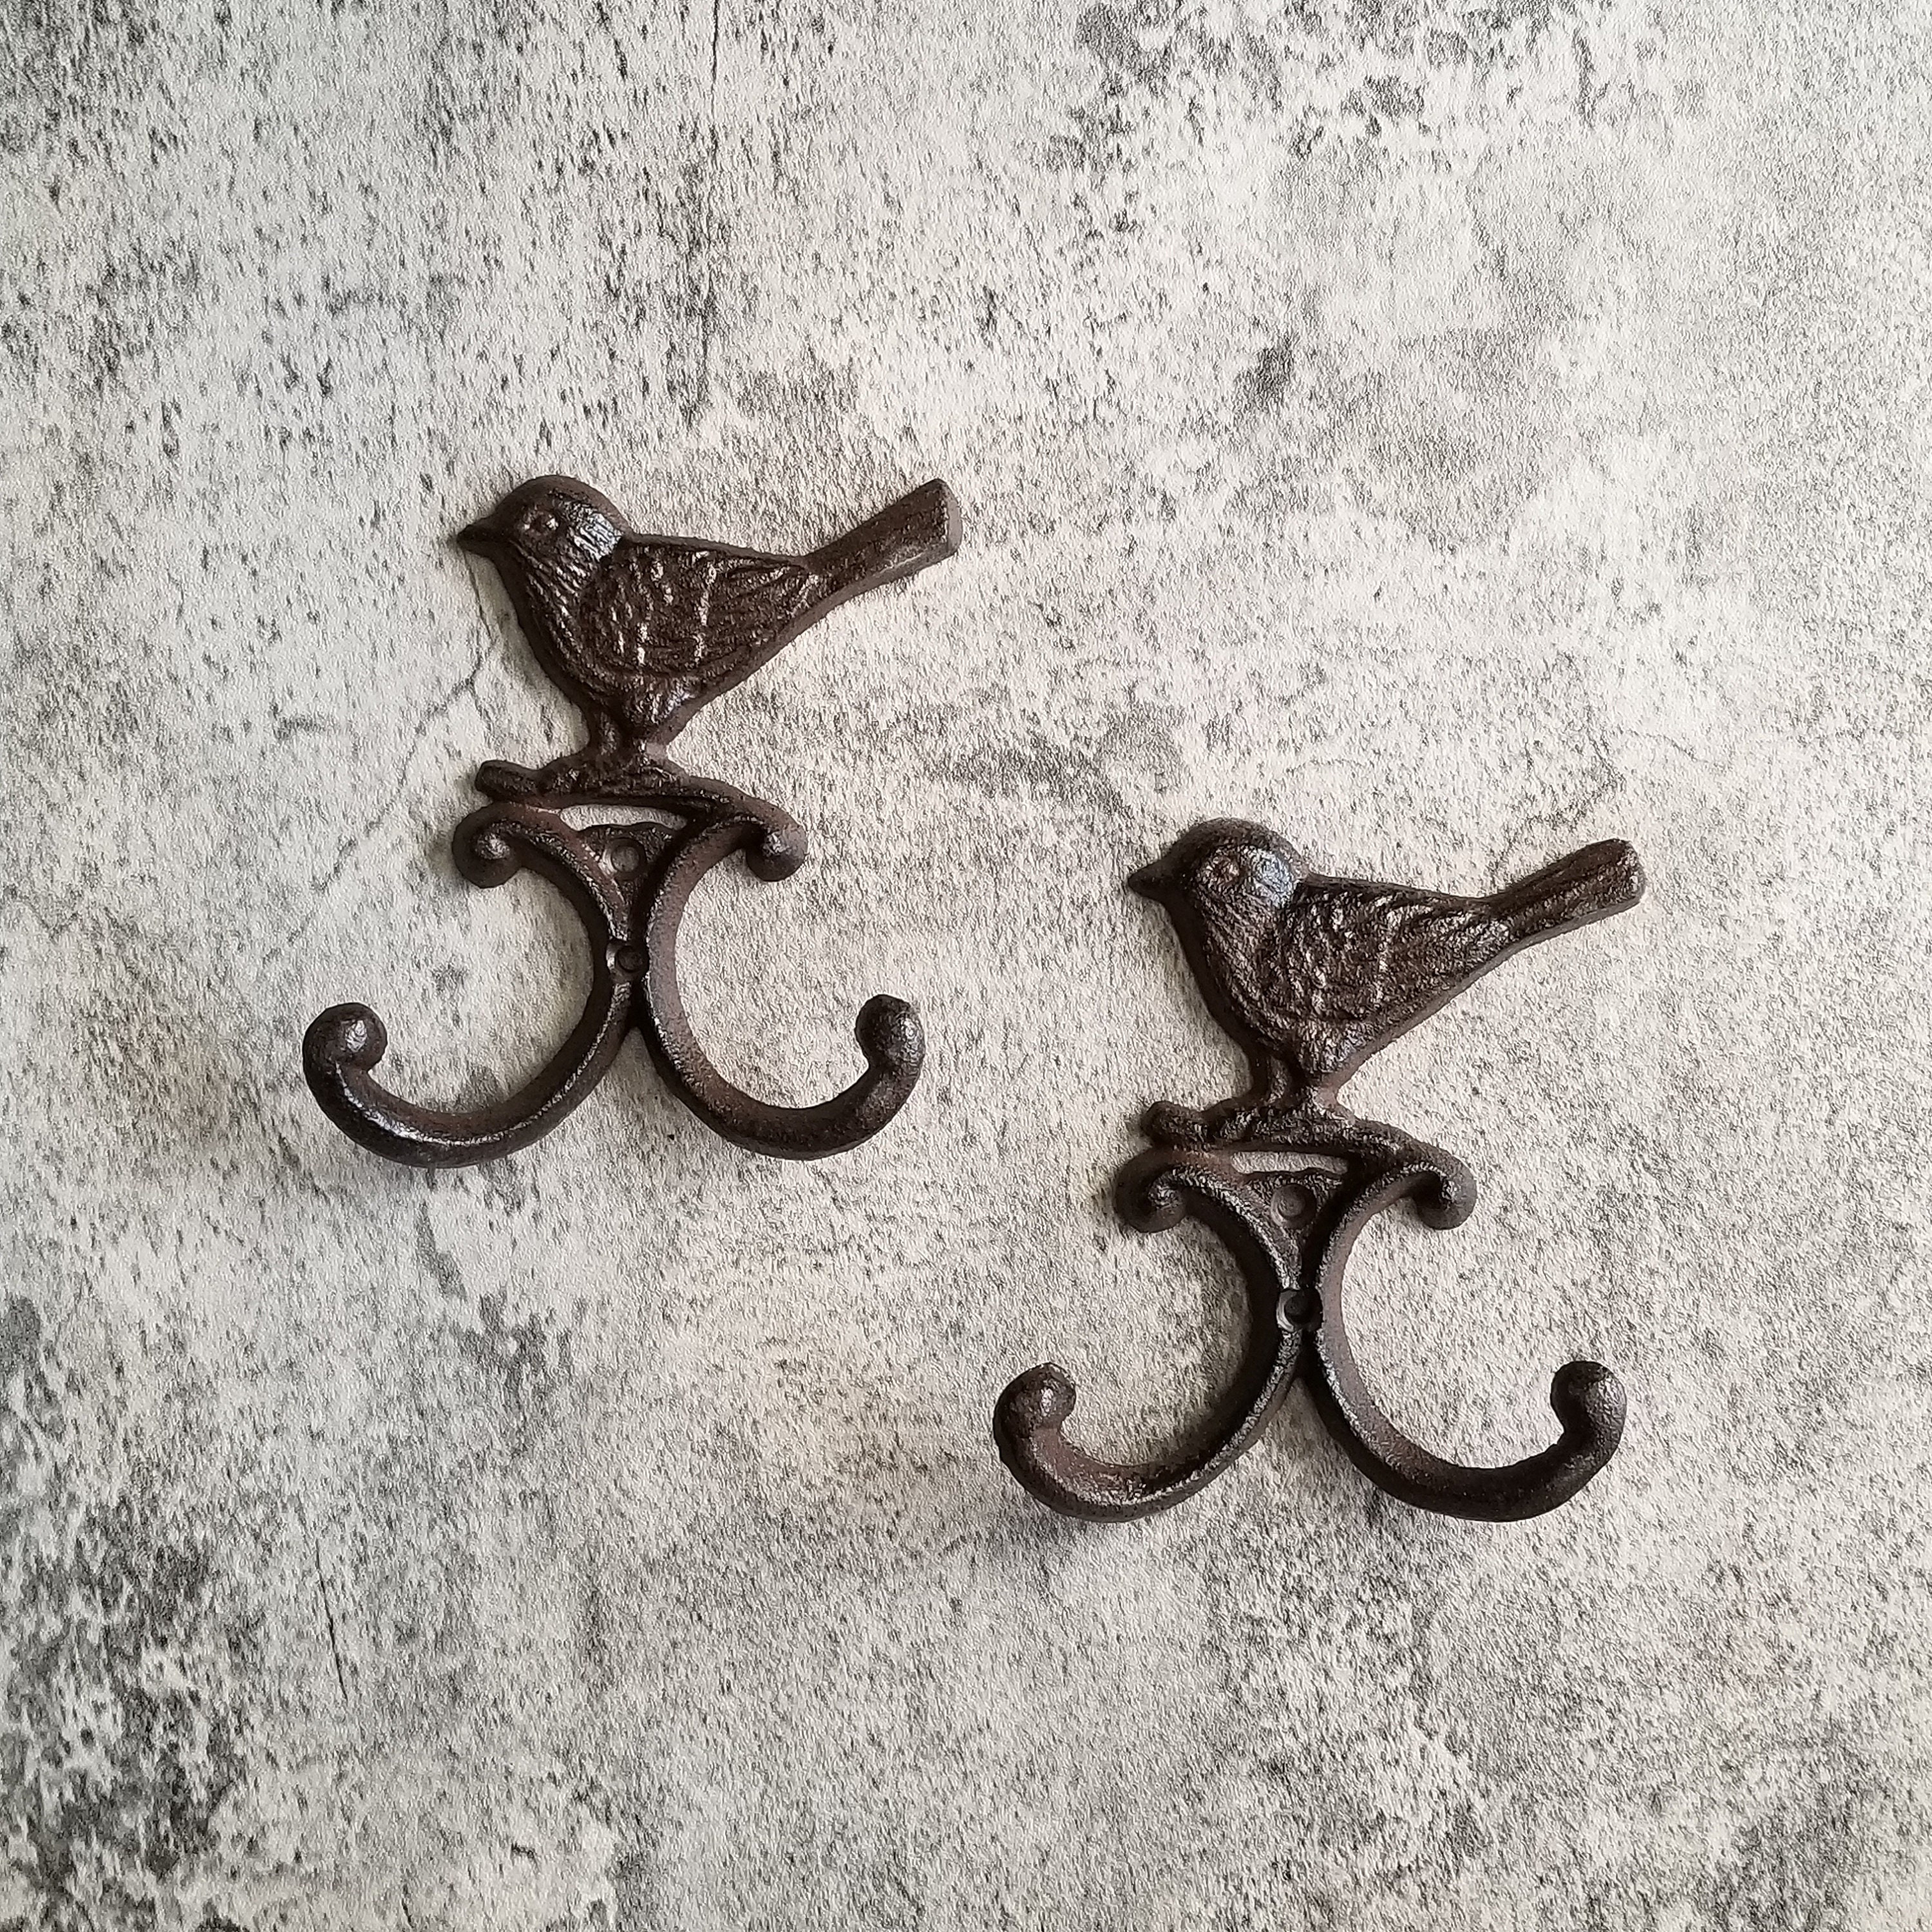 Rustic Cast Iron Coat Hooks 3 Pack Wall Mounted Farmhouse Decorative Wall  Hooks W/ Screws, Vintage Hooks for Hanging Coats antique White 